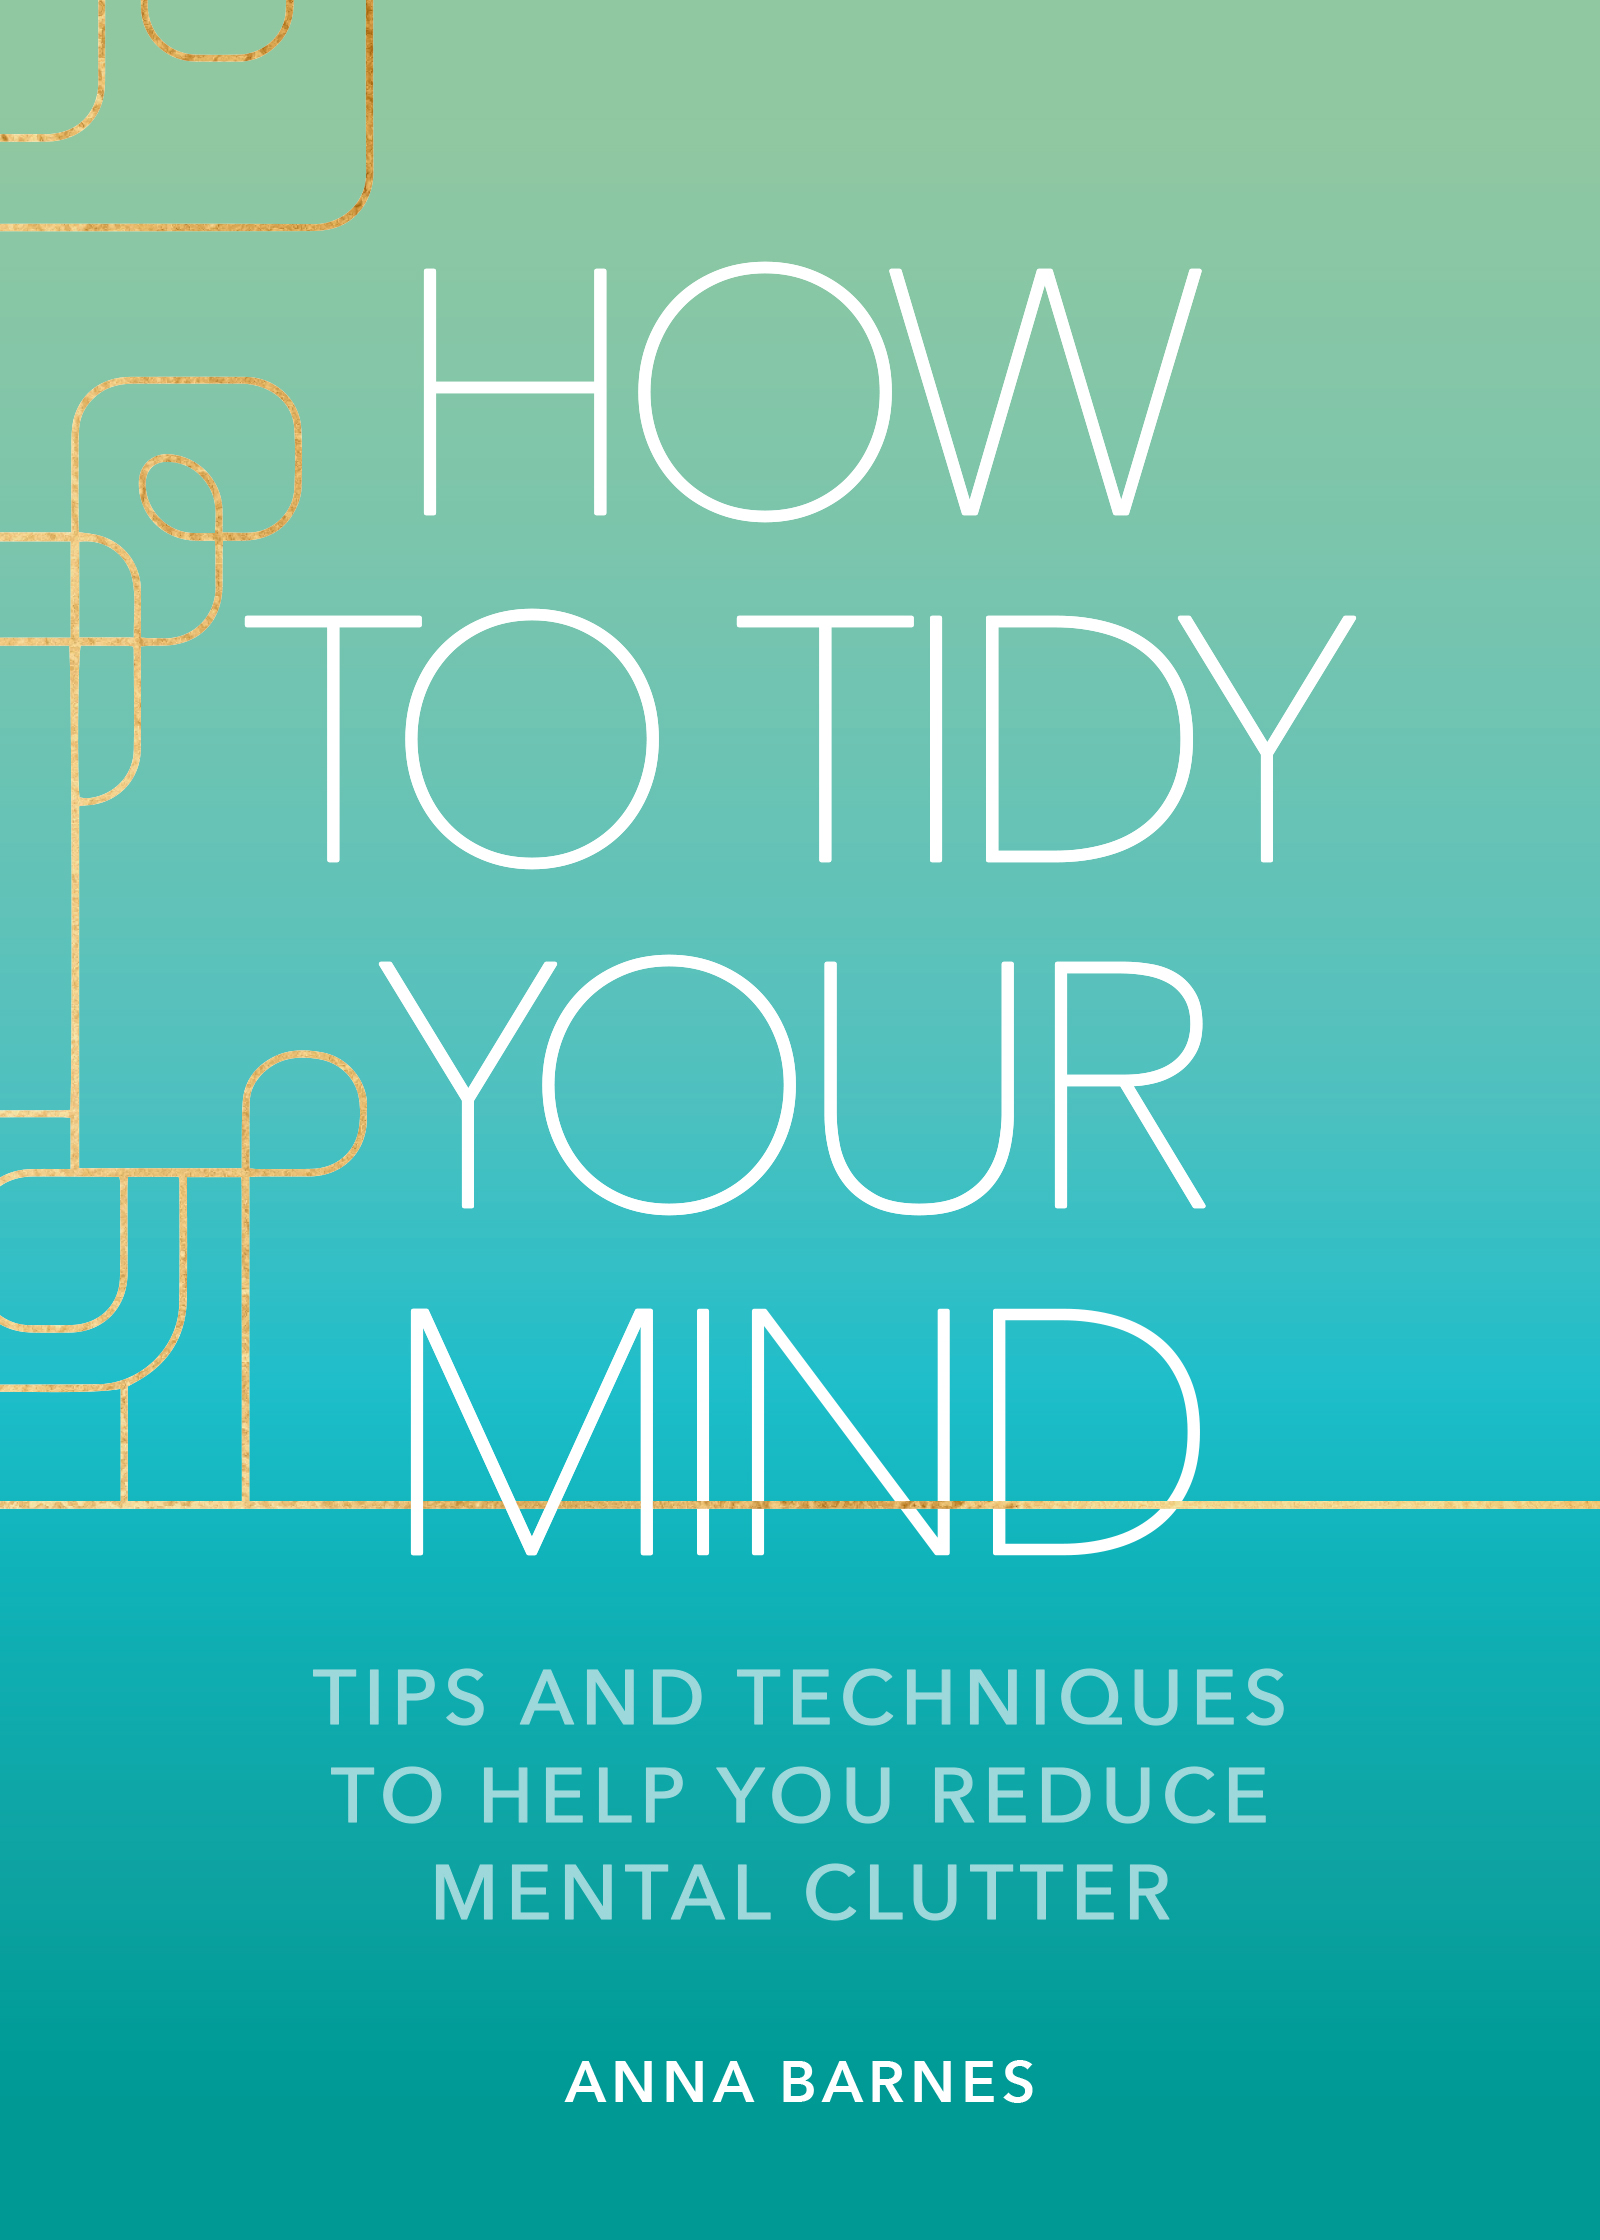 How to Tidy Your Mind Tips and Techniques to Help You Reduce Mental Clutter cover image